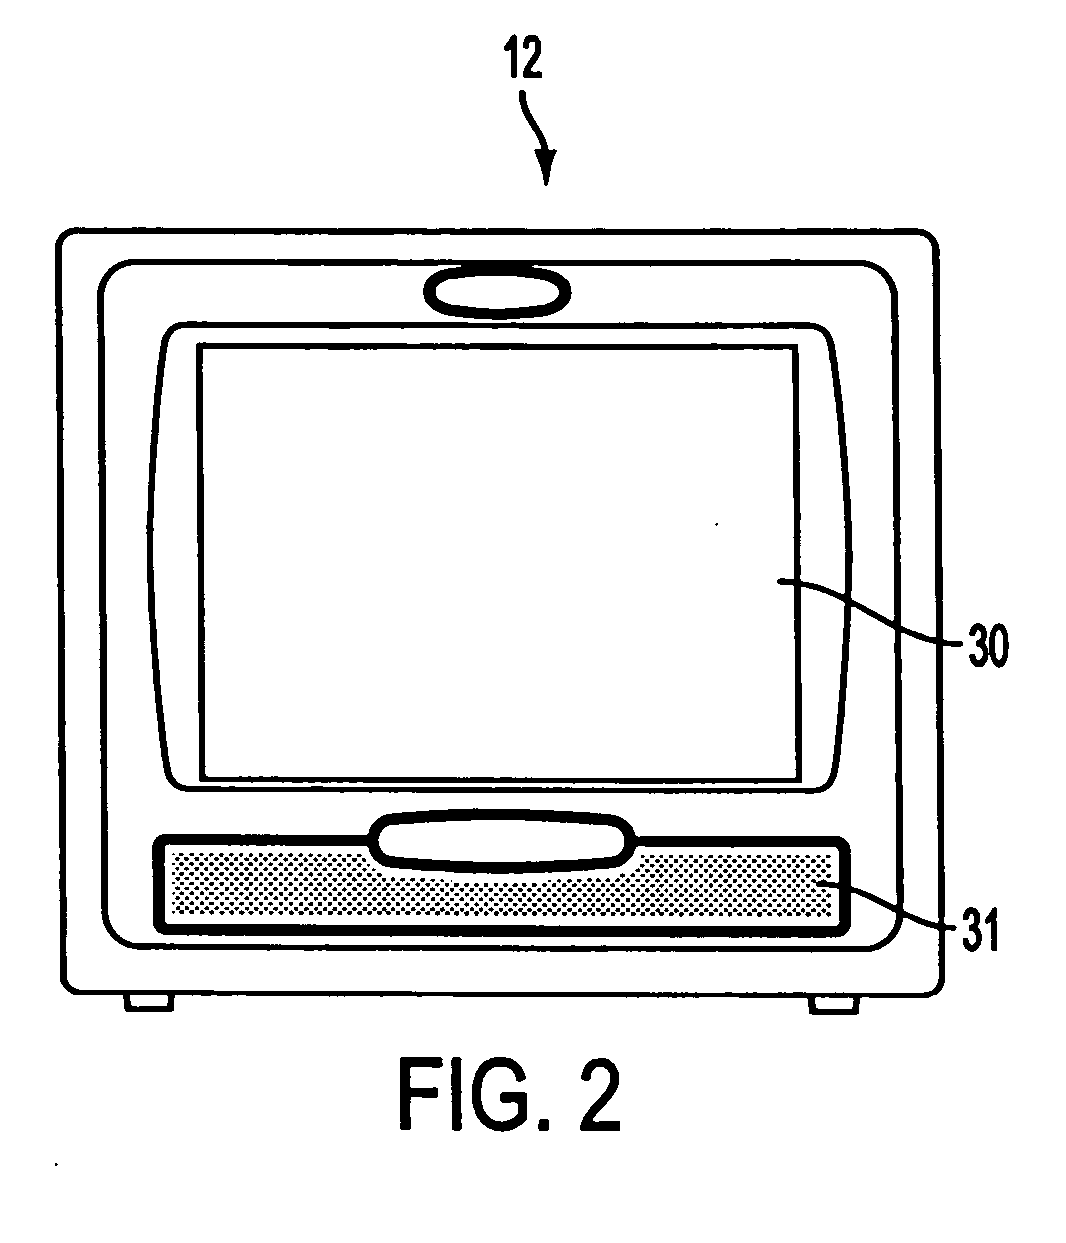 Apparatus and method for intraoperative neural monitoring